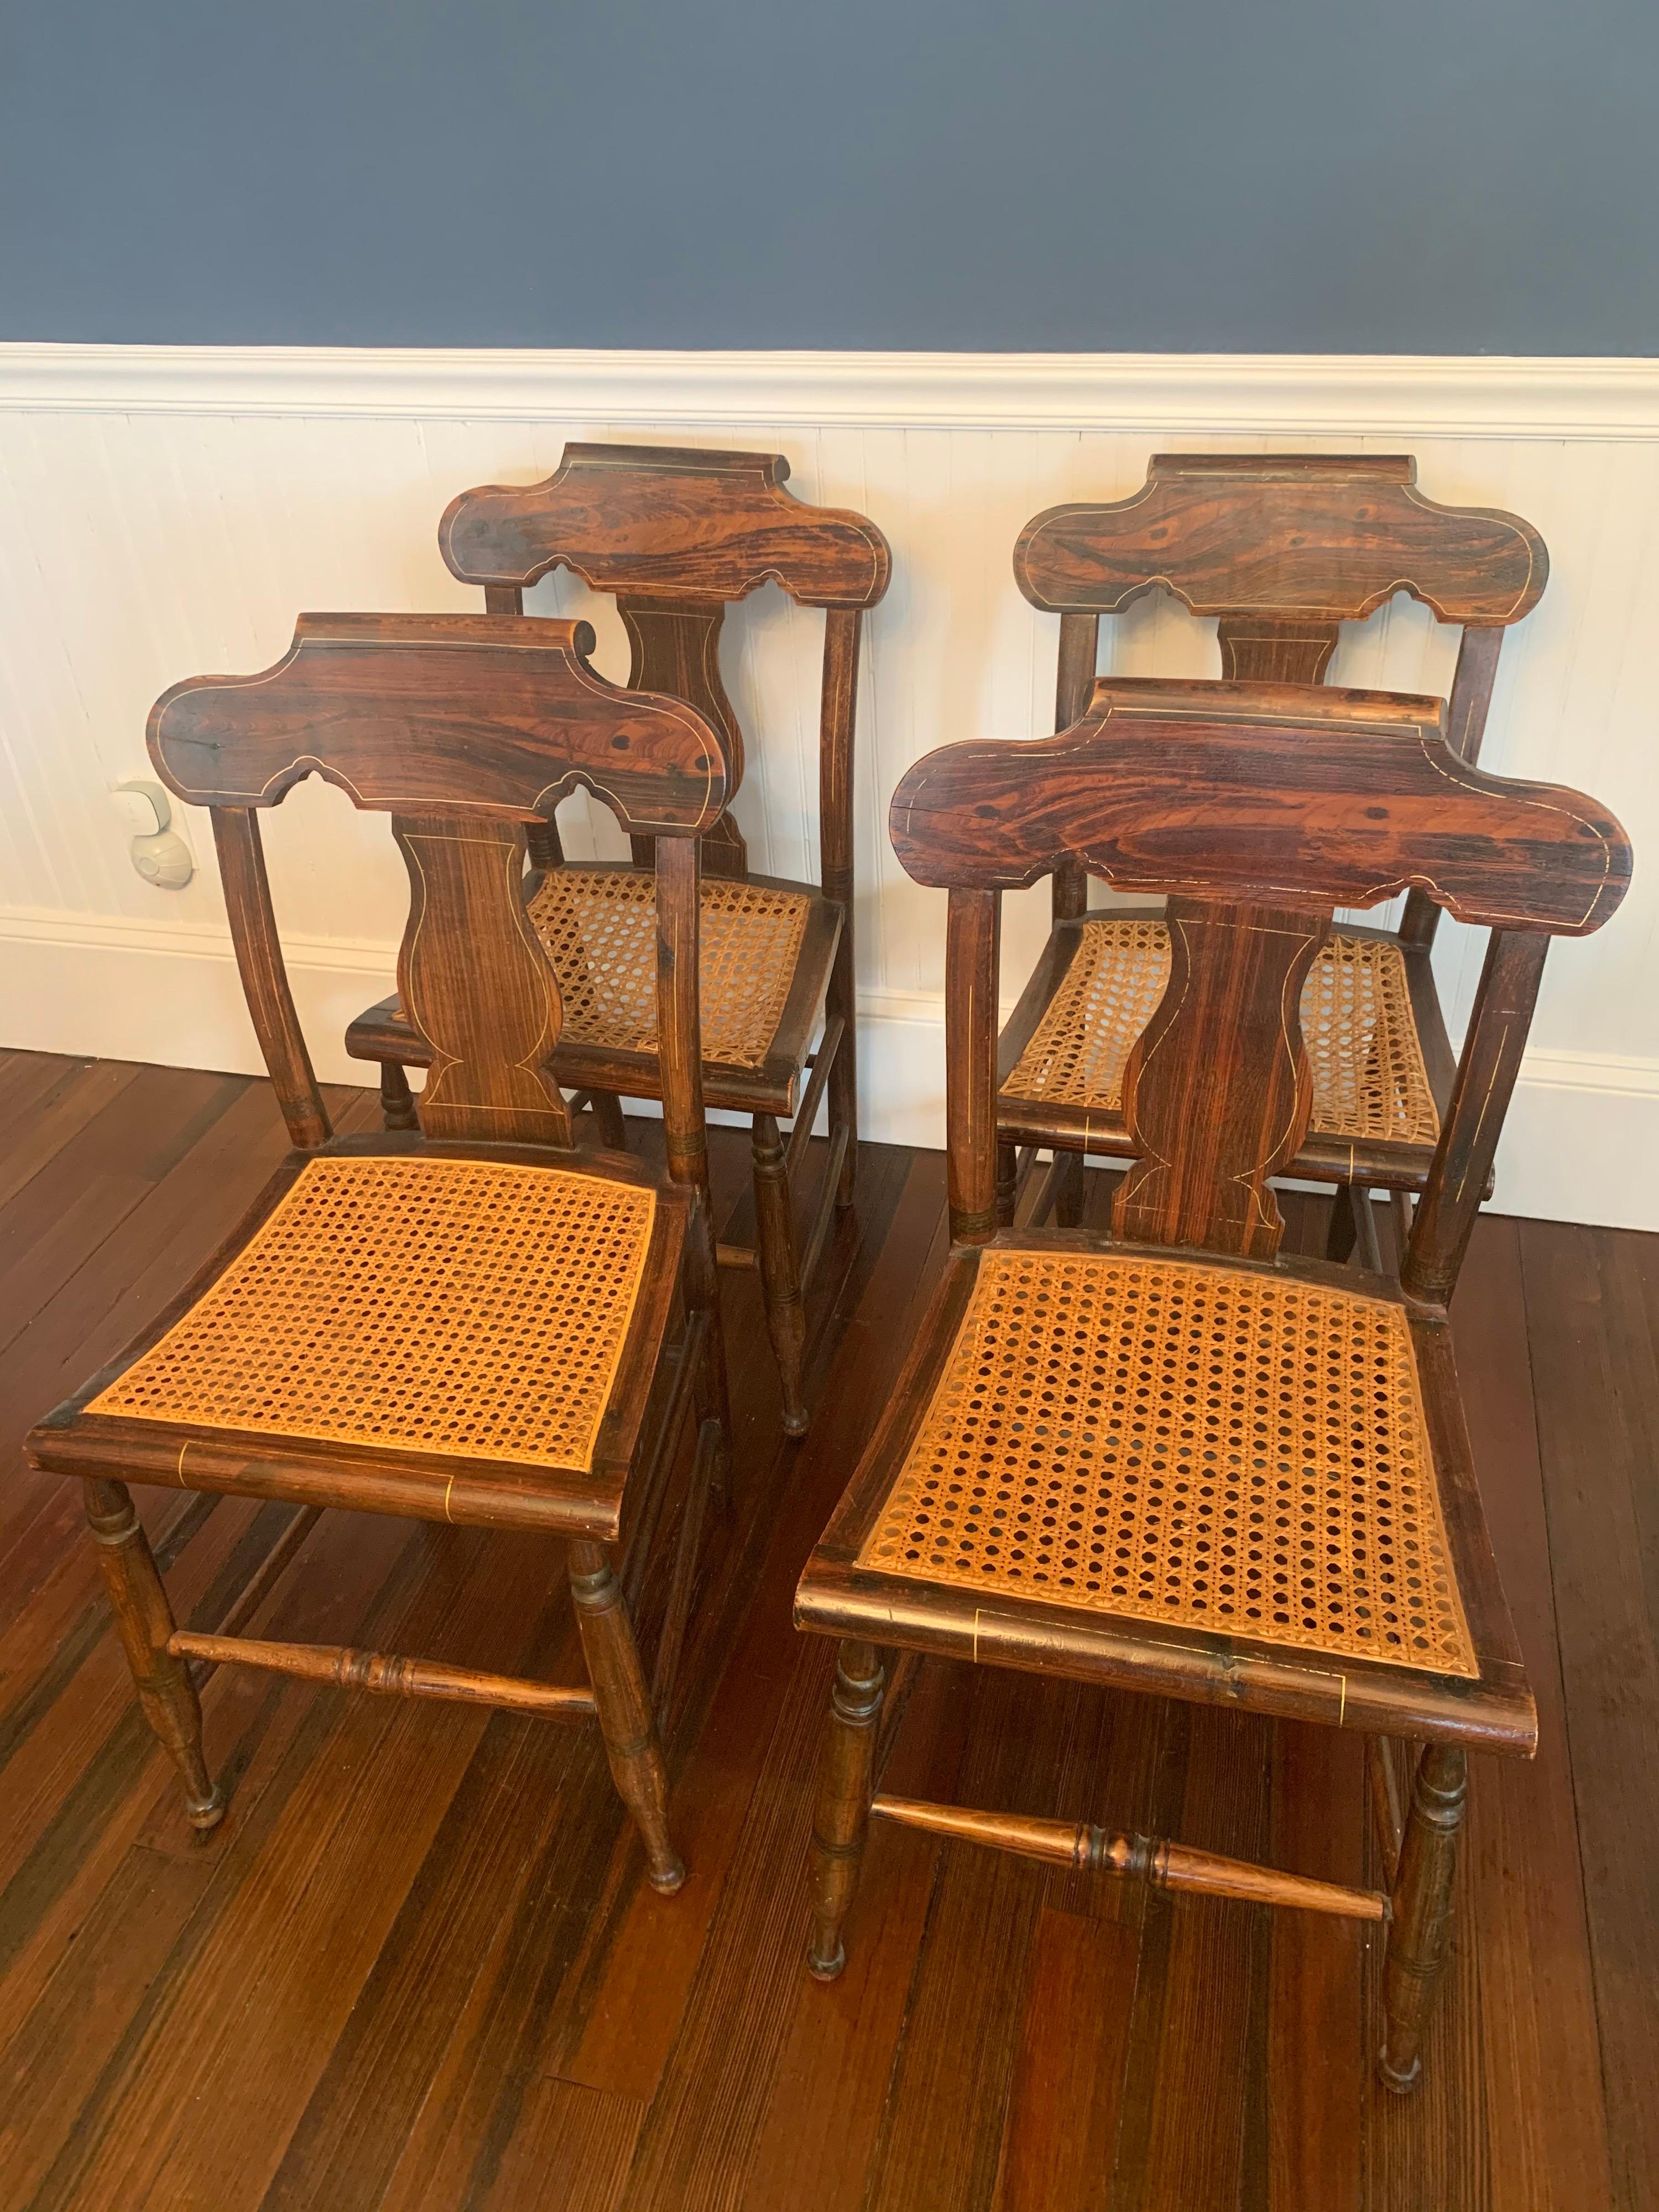 Set of four American Classical painted faux grain rosewood & caned dining chairs -
A really lovely set of four chairs with faux painted rosewood design on the back and legs with delicate gold highlight line on the back (rubbed in some areas). Seats